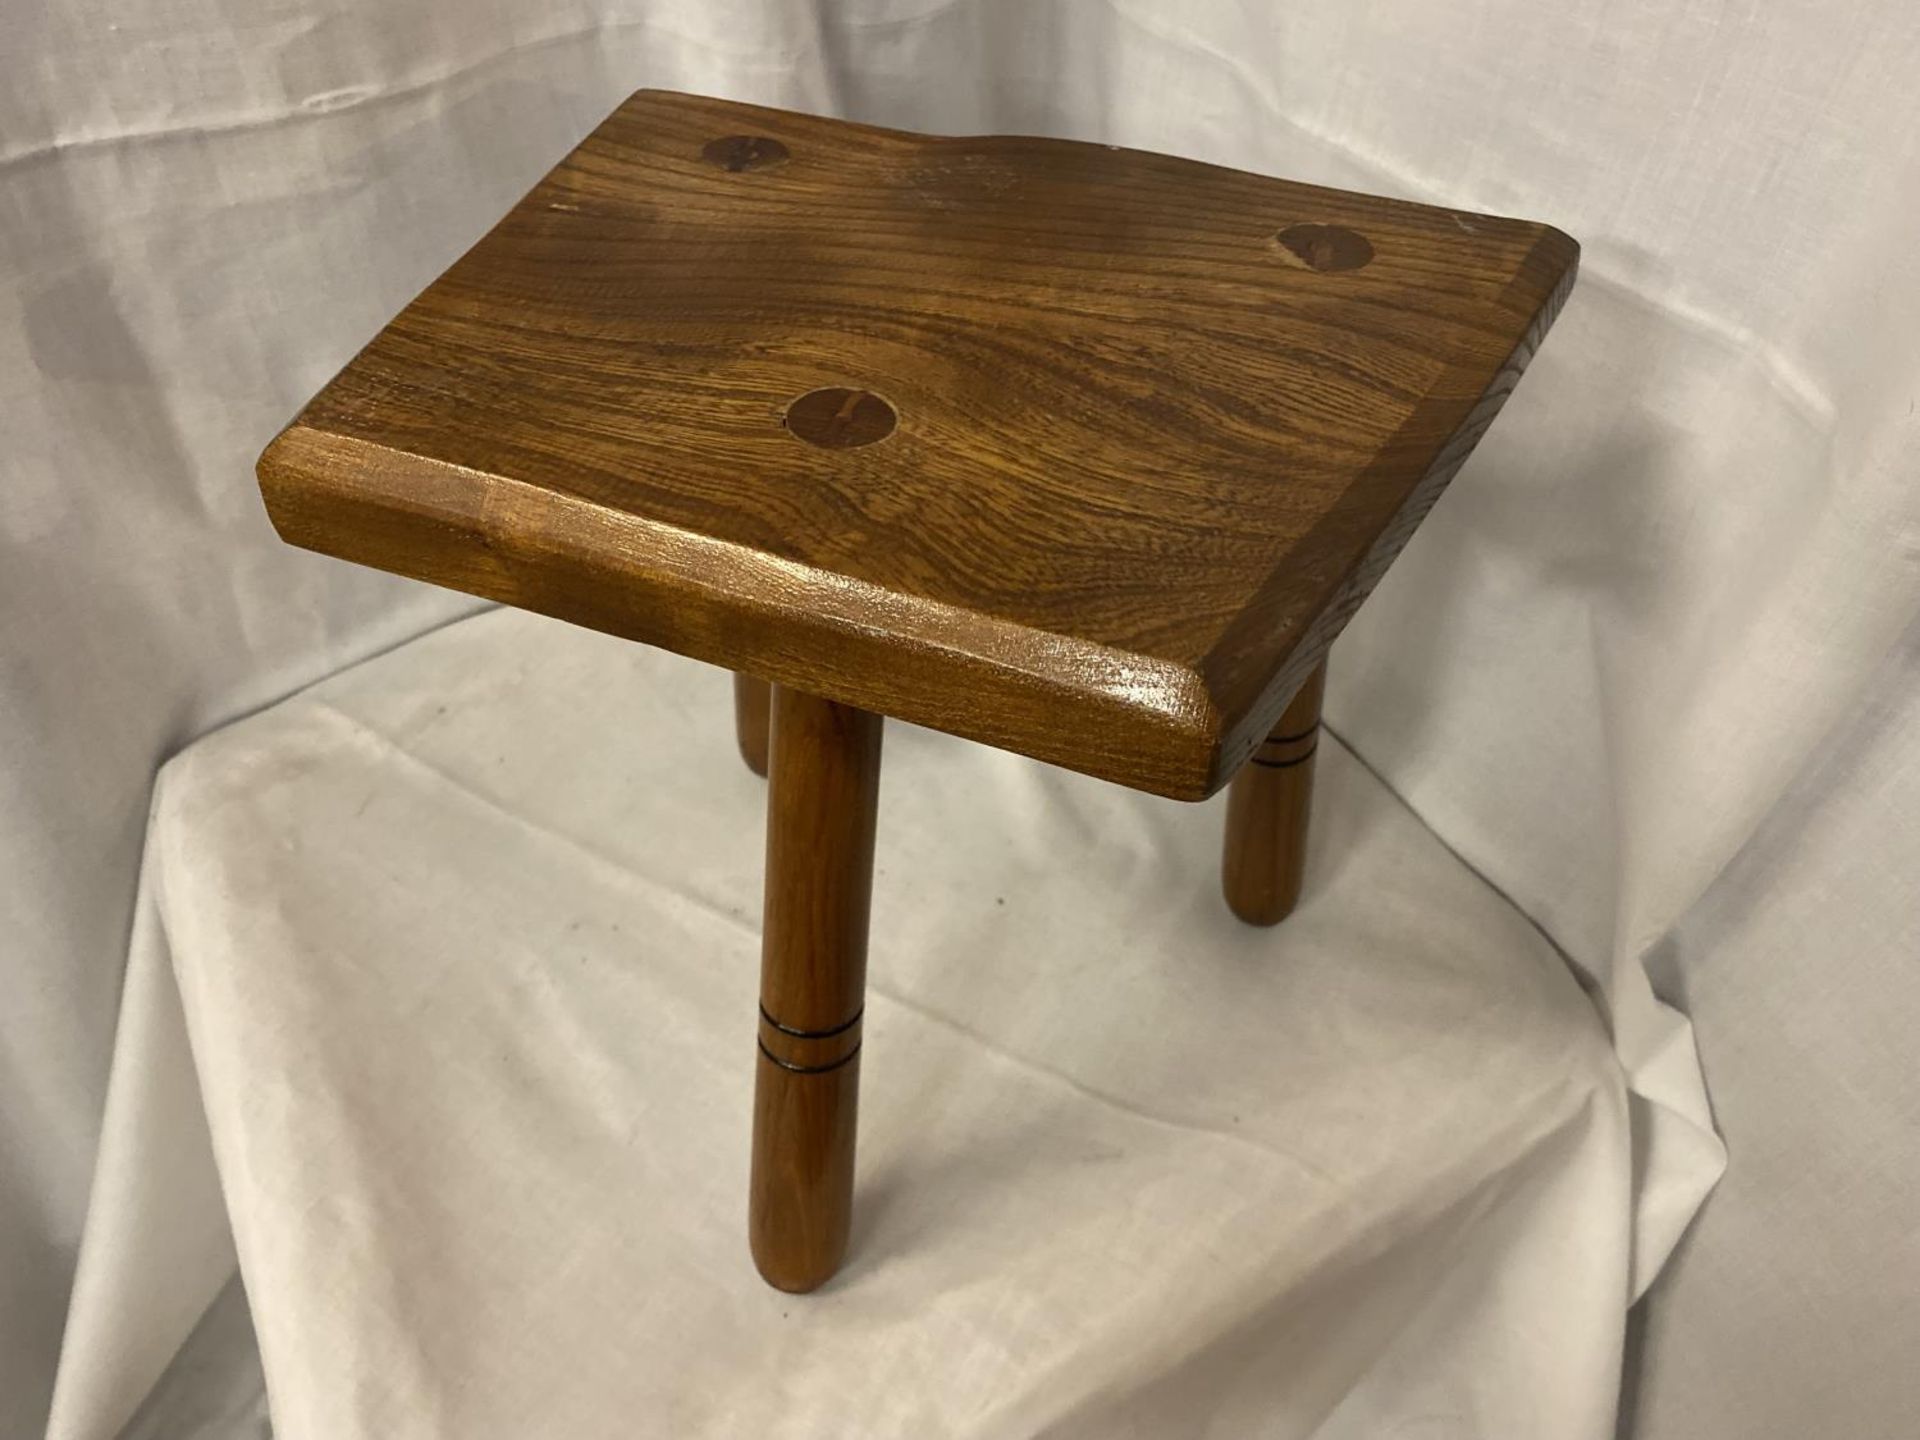 A THREE LEGGED MILKING STOLL WITH OAK TOP AND PINE LEGS - Image 3 of 3